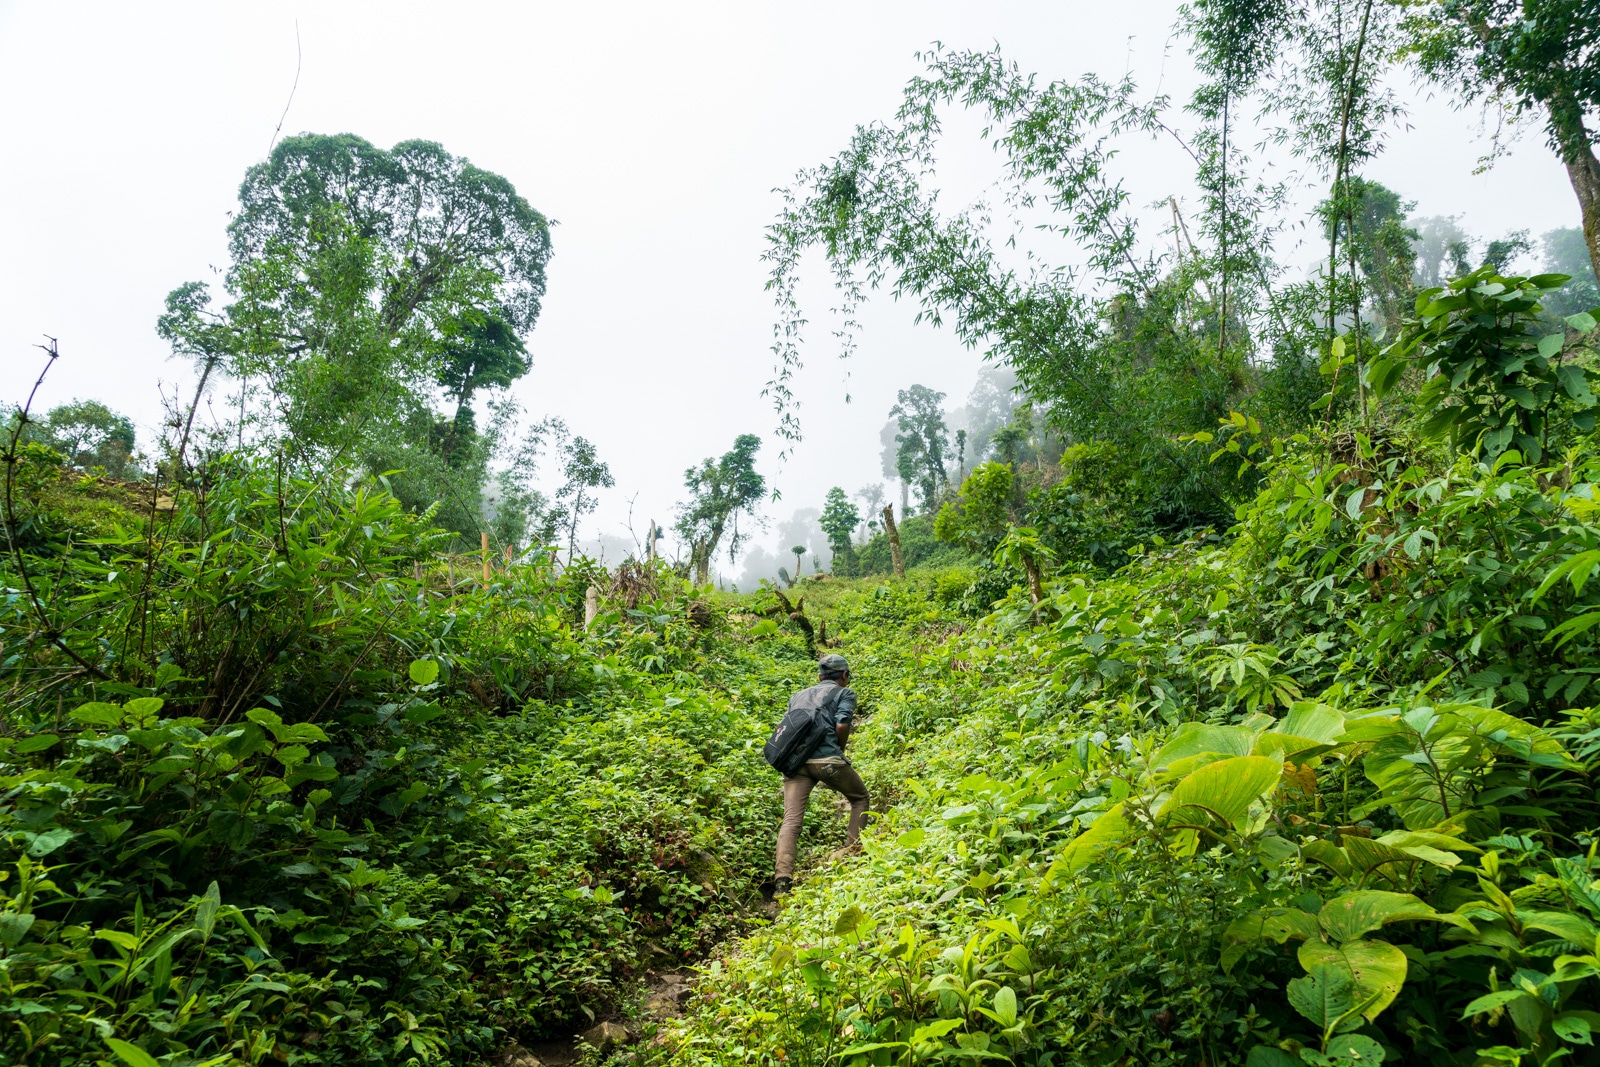 What to pack for monsoon travel - Walking in the jungles of Longwa, Nagaland, India - Lost With Purpose